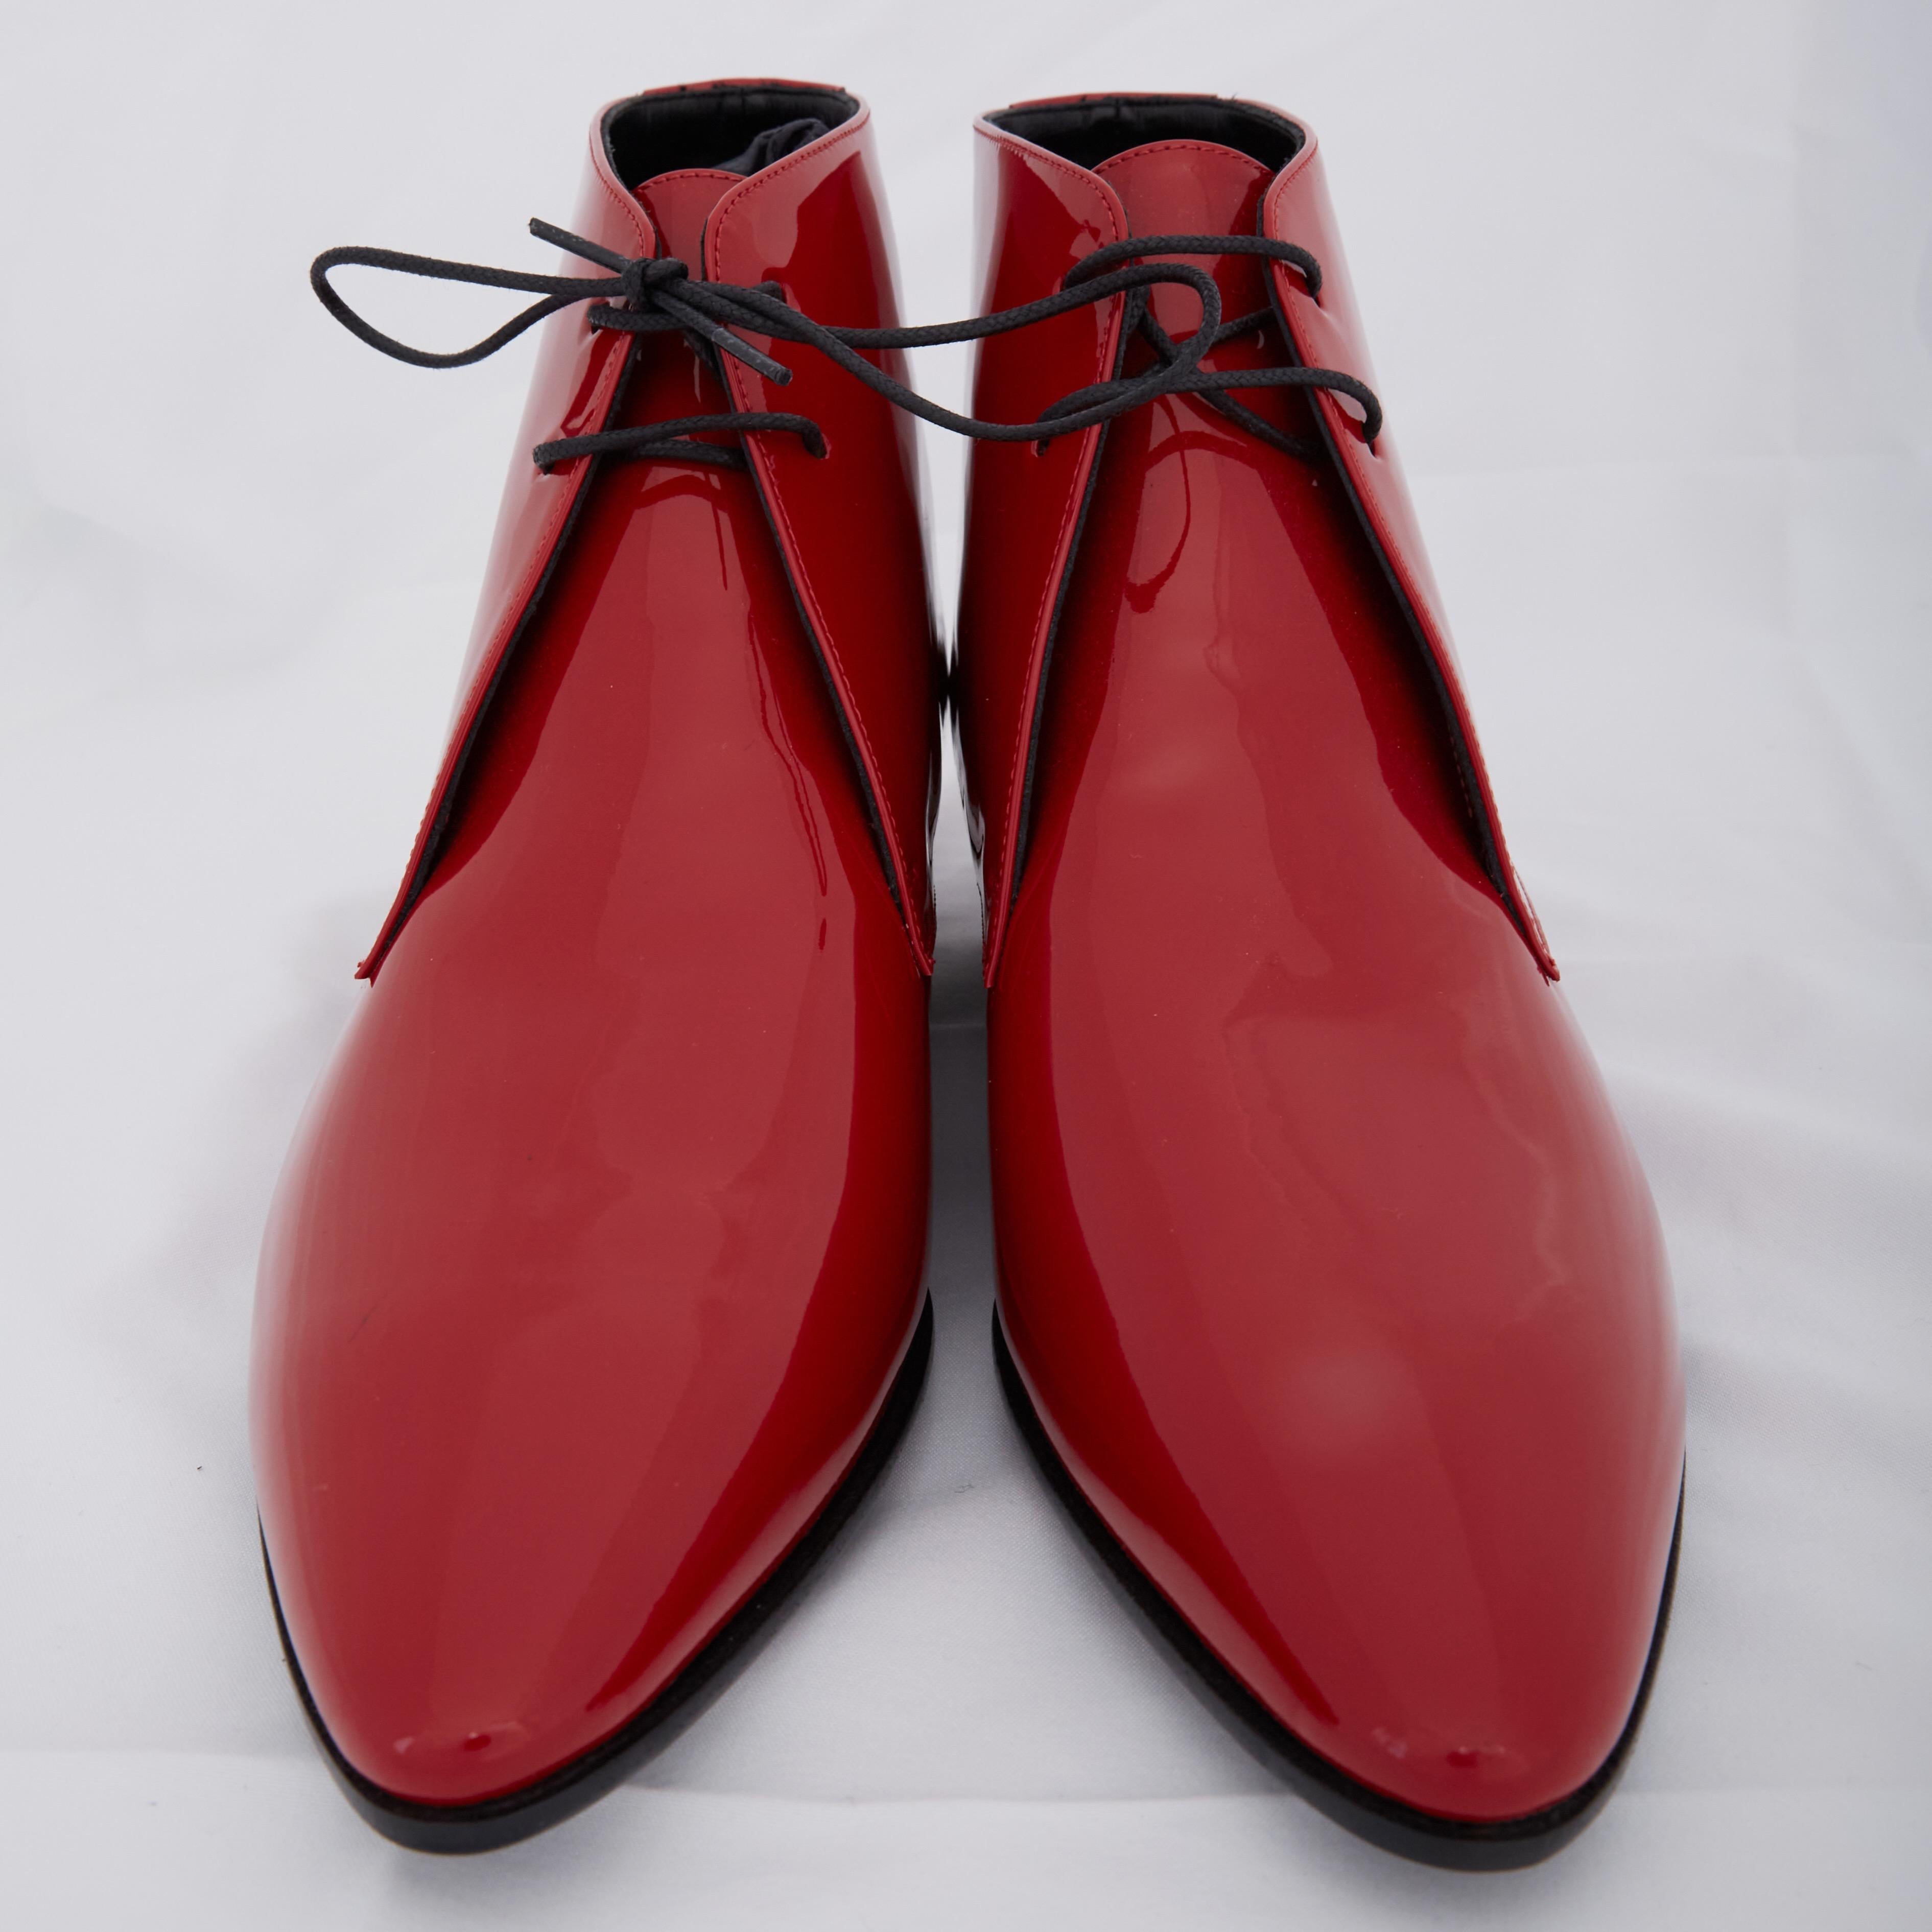 Women’s red ‘Jonas’ lace-up heeled ankle boots from Saint Laurent. Made of smooth patent leather. They feature a leather sole with a rubber insert.

COLOR: Red
MATERIAL: Patent leather
ITEM CODE: 581845
SIZE:  EU 39 / 8 US
HEEL HEIGHT: 25 mm /